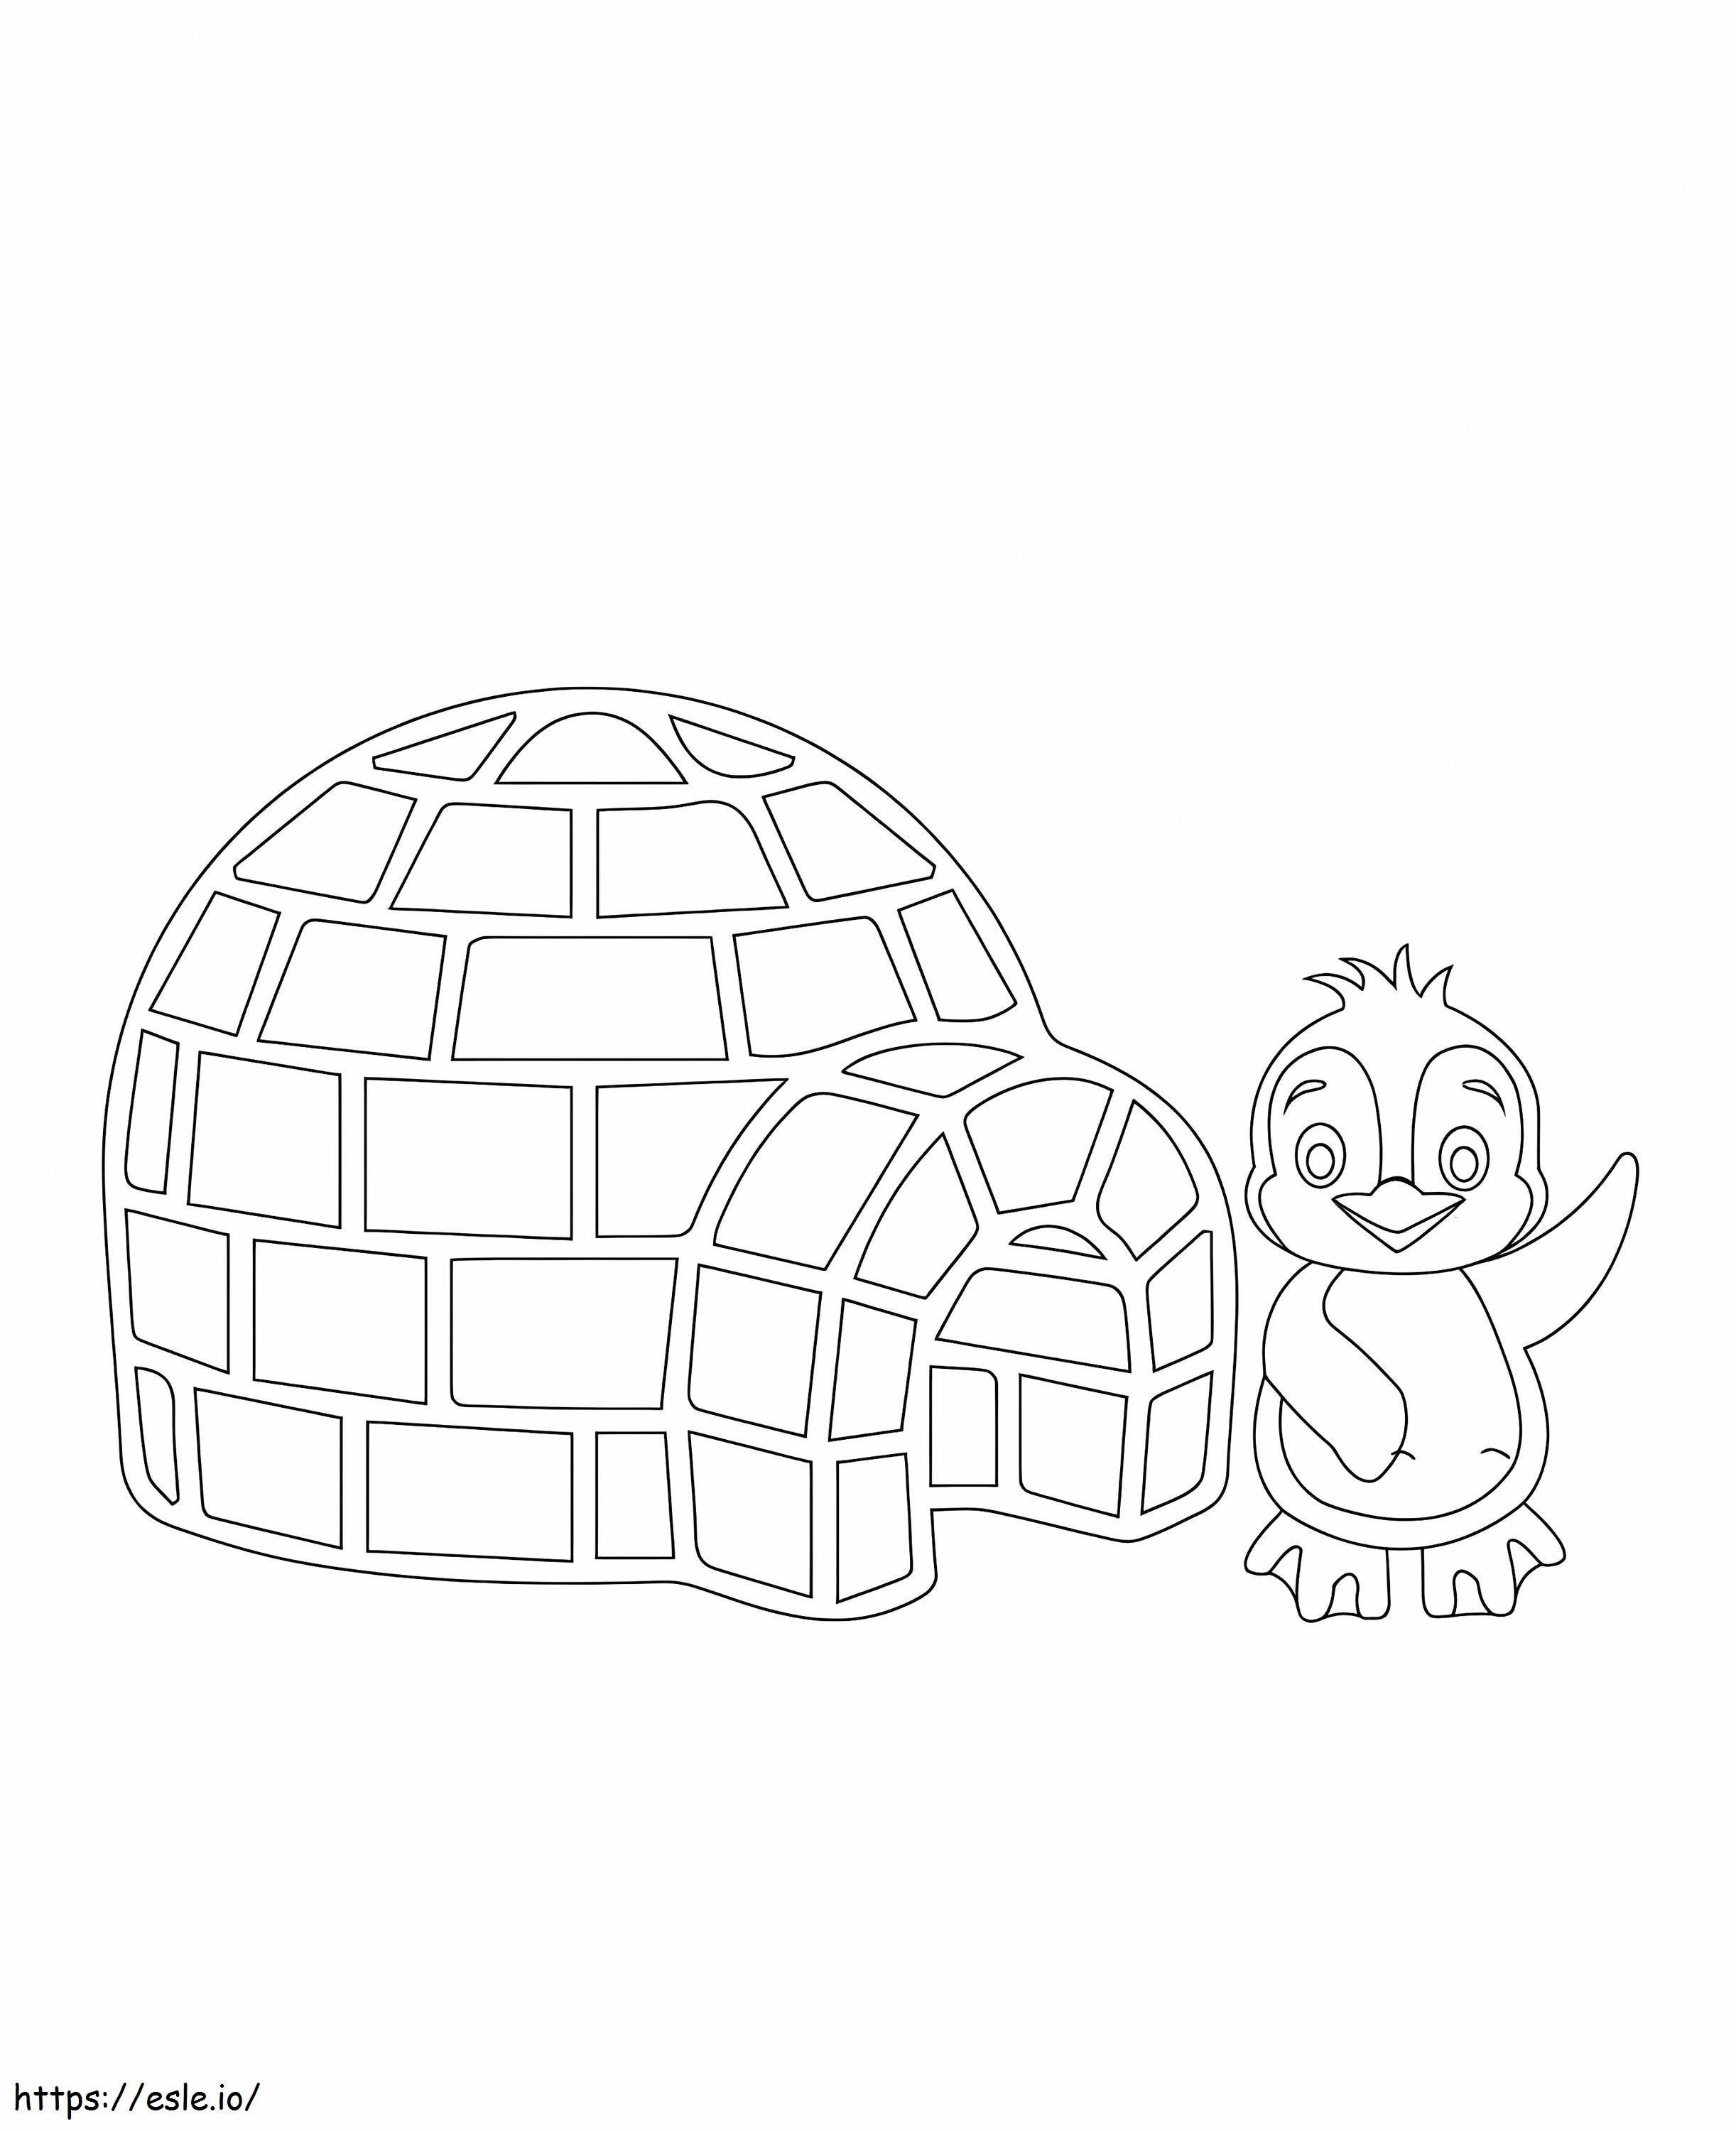 Igloo And Smiling Penguin coloring page